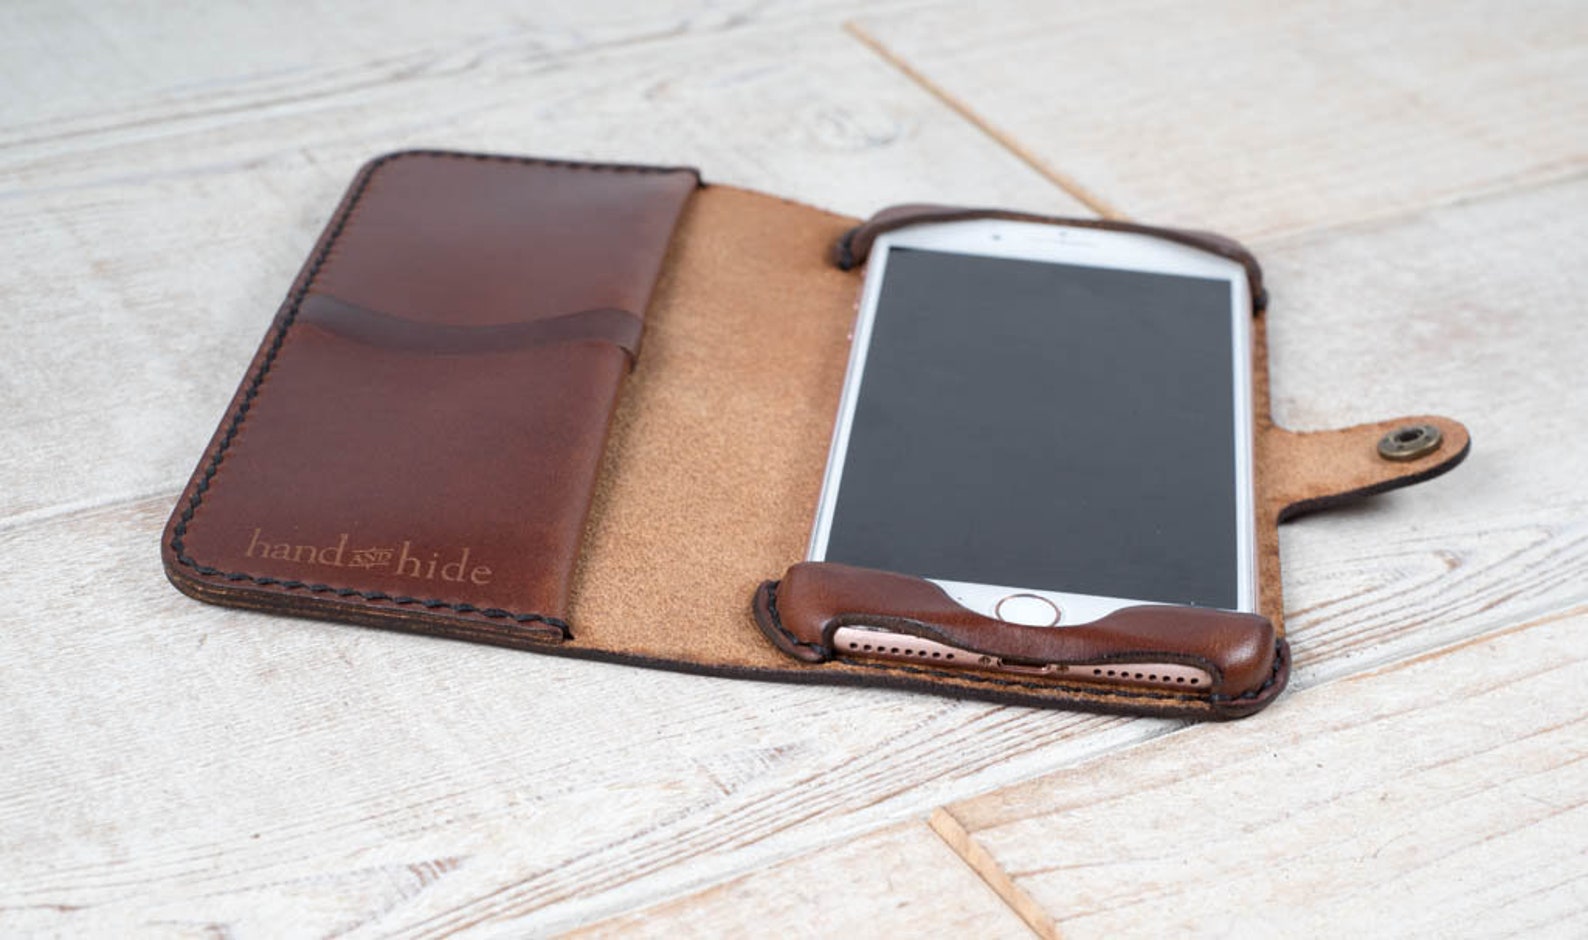 Iphone 6s Plus Leather Wallet Case Leather Iphone 6 Plus Etsy